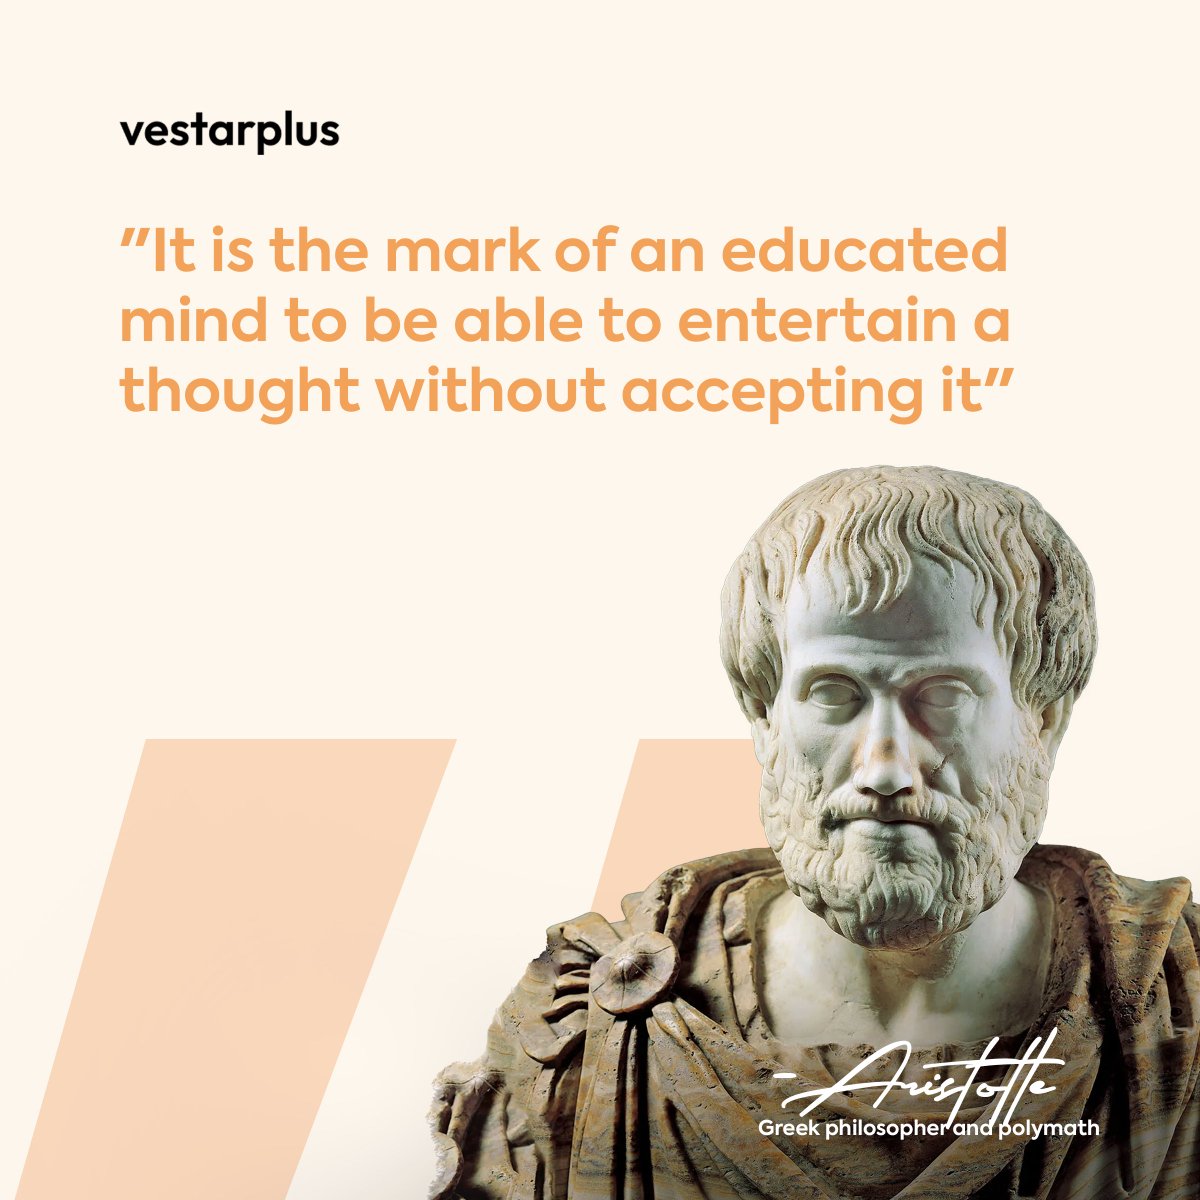 'It is the mark of an educated mind to be able to entartain a thought without accepting it'... Aristotle. #quotes #office #growth #growthmindset #business #tech #startup #entreprenuer #sme